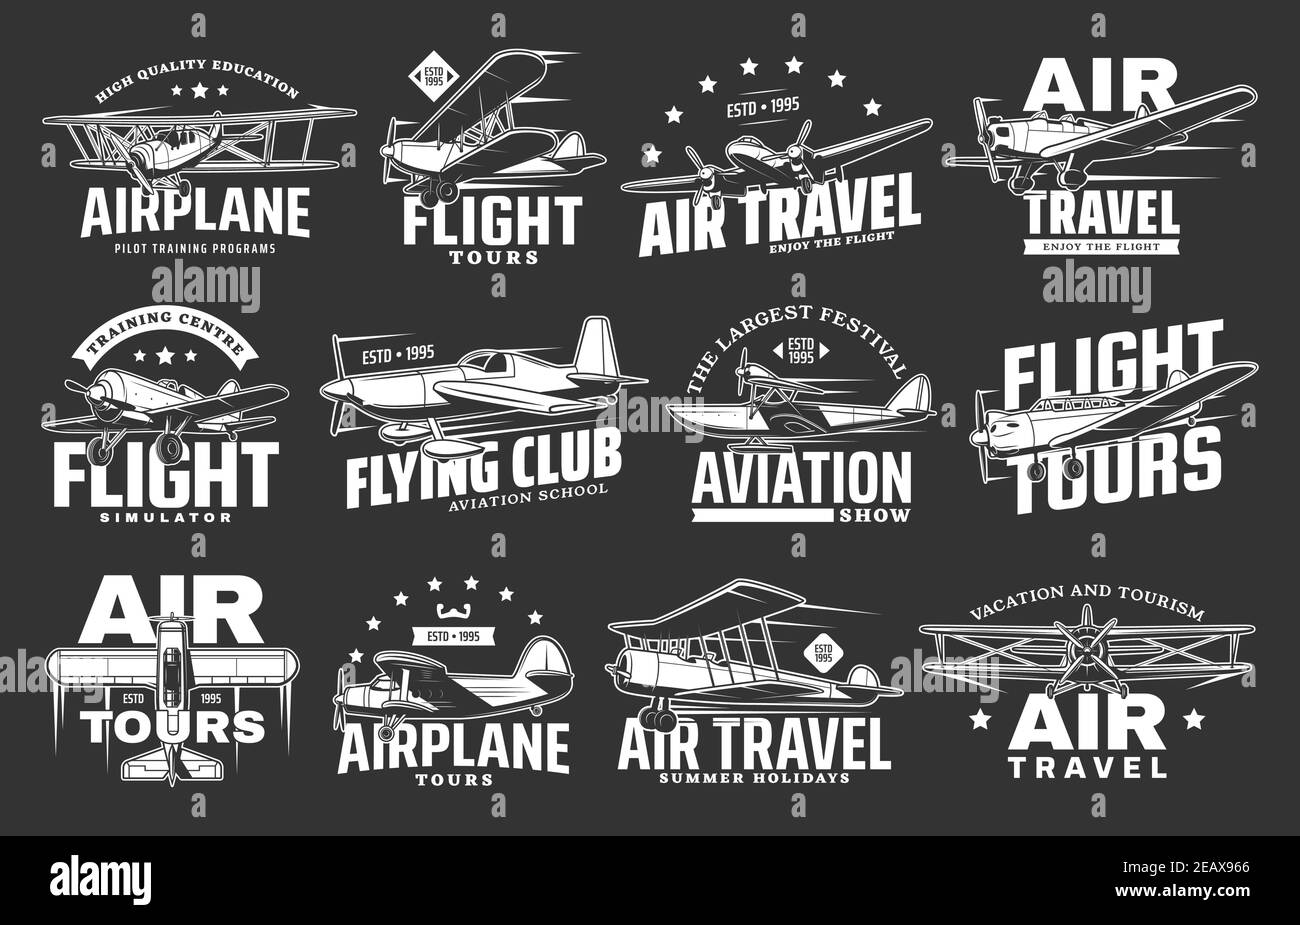 Airplane flight tours, air plane travel and aviation school, vector icons. Retro airplane tourist flights, aviation show and pilot aviator academy emb Stock Vector